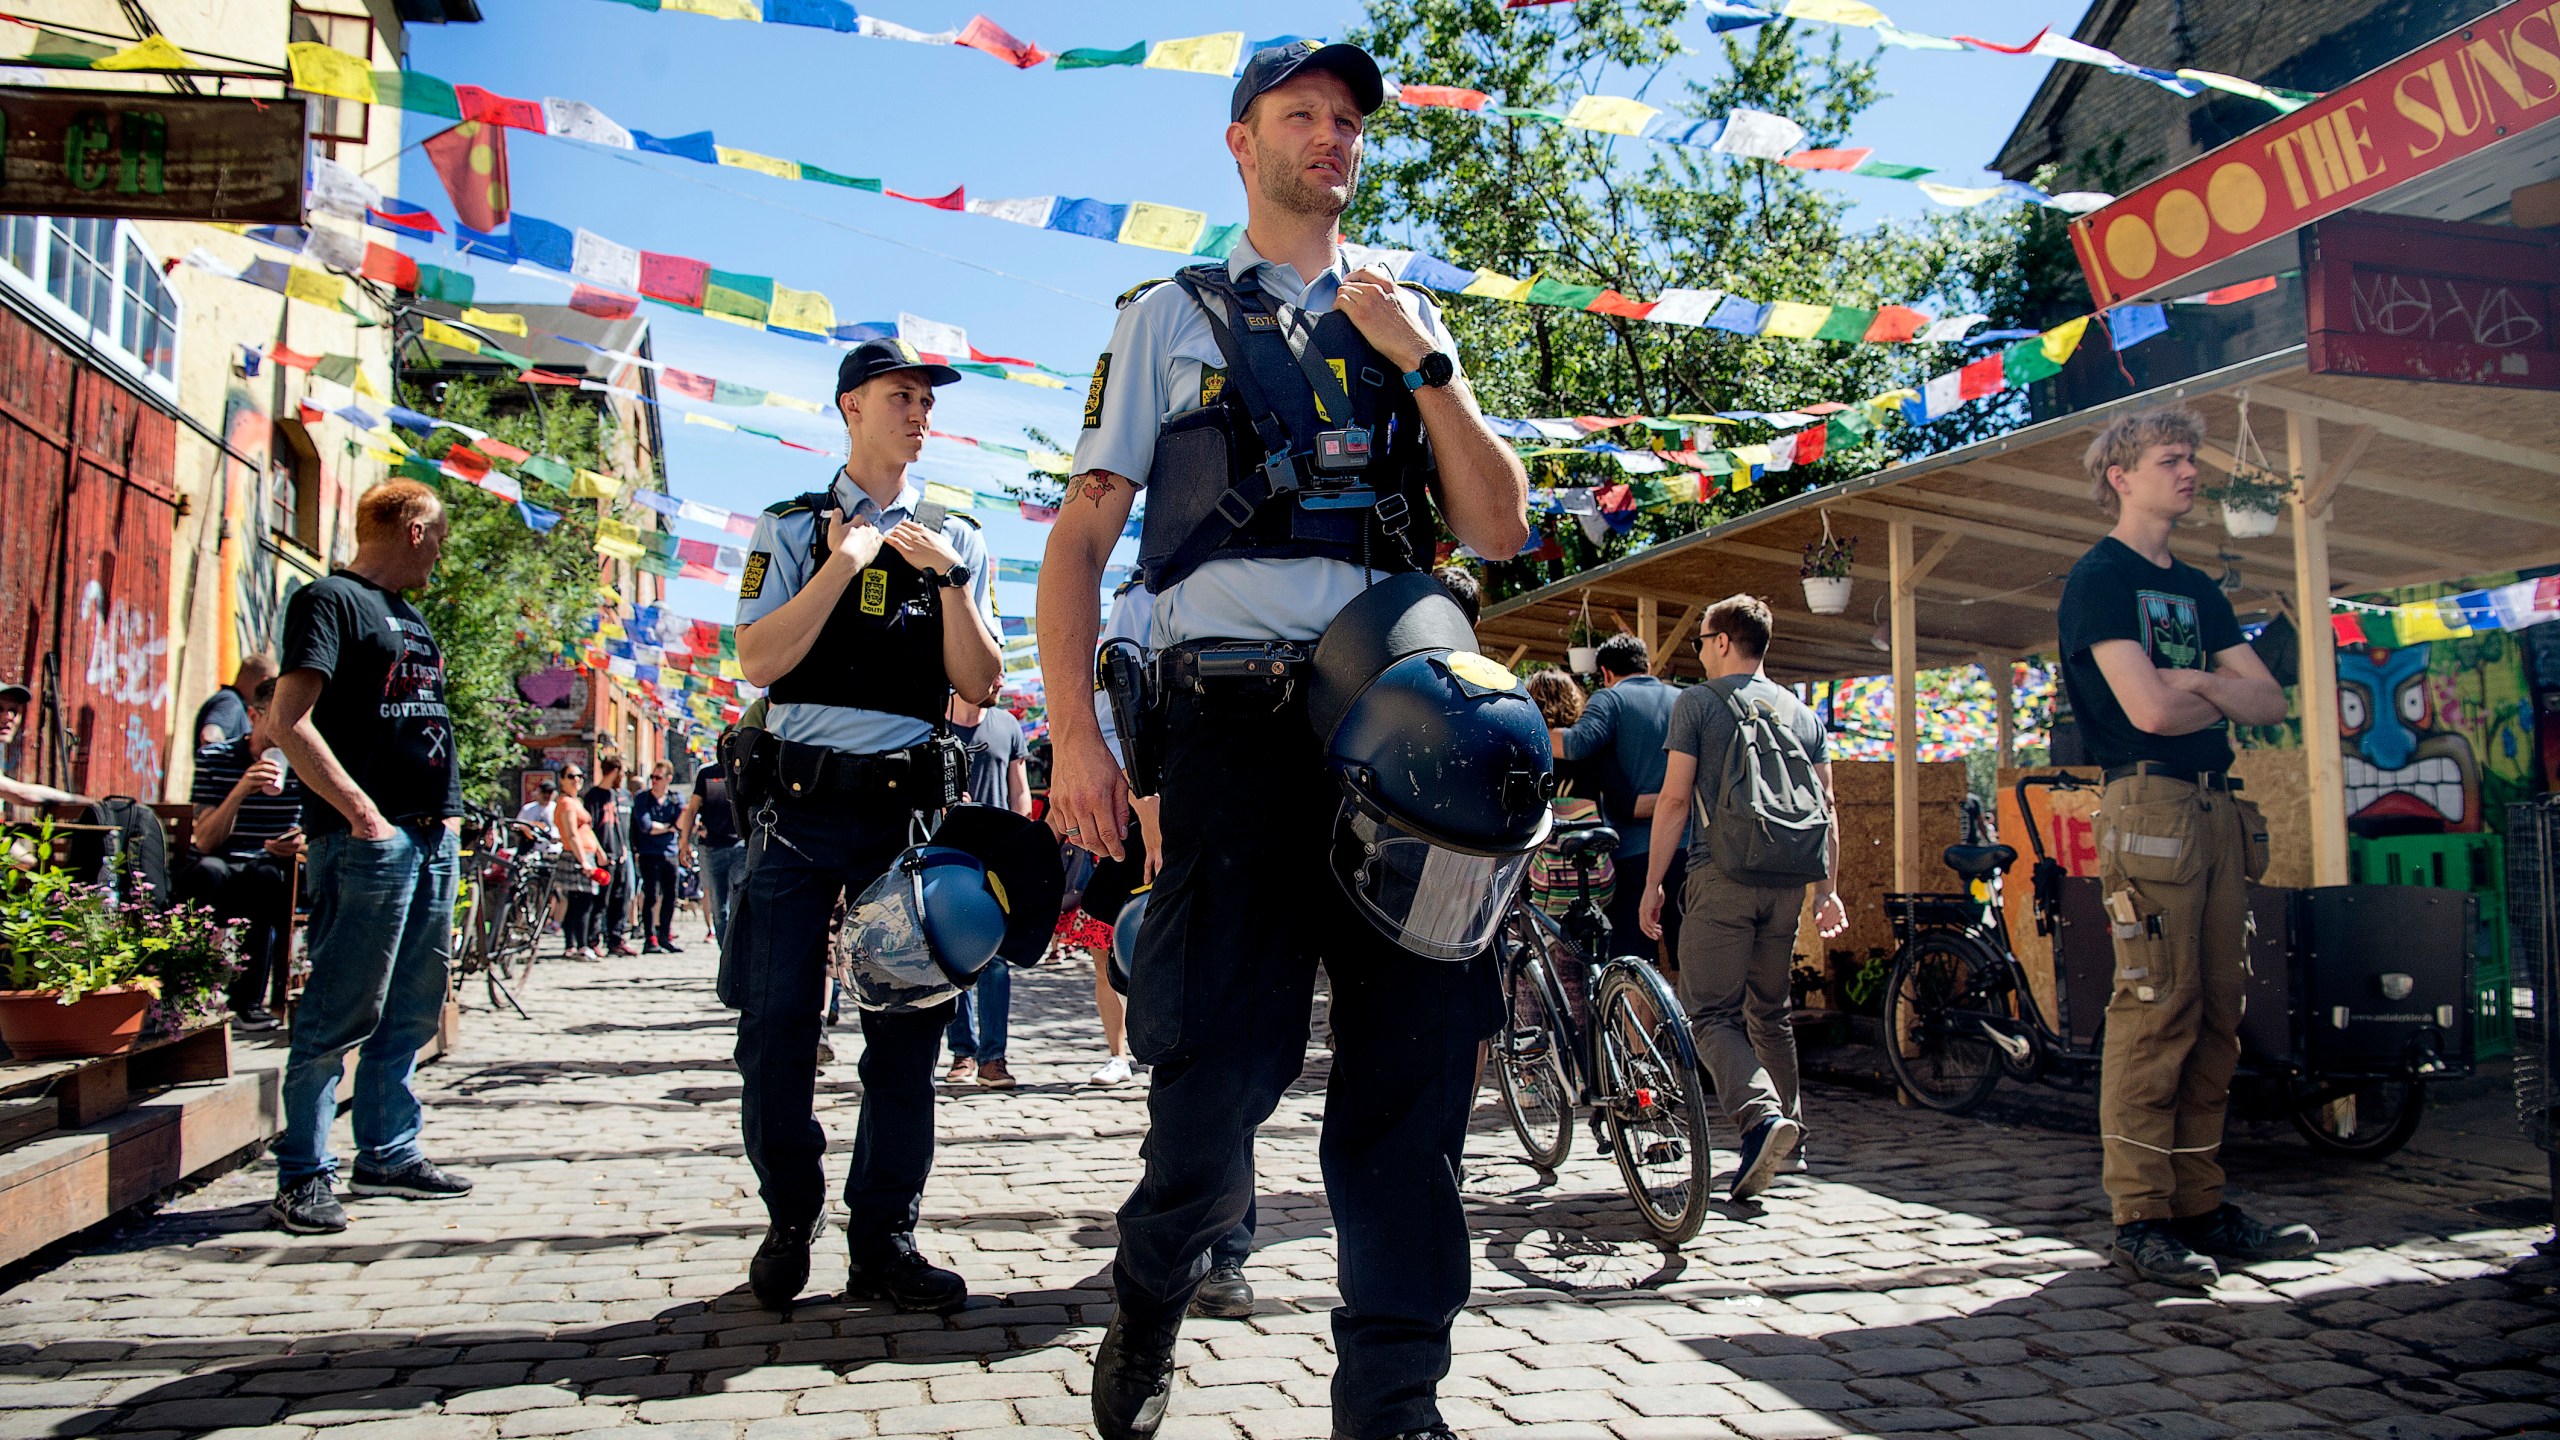 FILE - Police patrol Pusher Street in at Christiania, Copenhagen, Friday, May 25, 2018, after the street reopened after having been closed for three days. The inhabitants of Copenhagen's freewheeling Christiania neighborhood want dig up the aptly named Pusher Street where cannabis has been sold for decades although the trade is illegal, in the latest attempt to stop the hashish sale which has led to deadly gang turf wars and sometimes violent confrontations with the police. (Nils Meilvang/Ritzau Scanpix via AP, File)